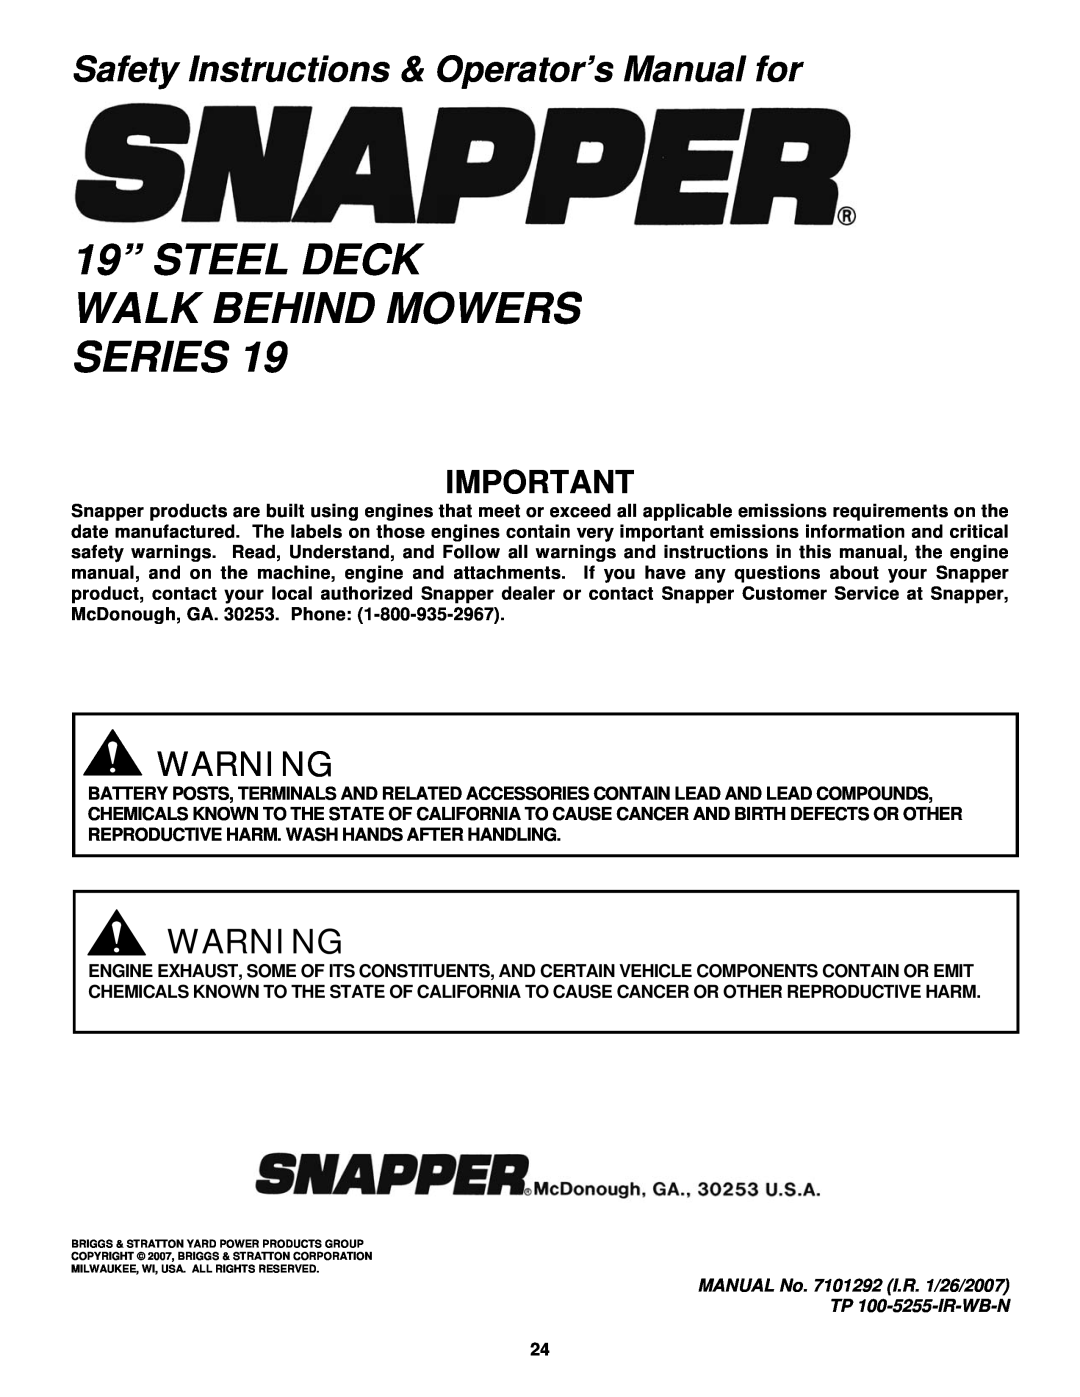 Snapper R1962519B 19” STEEL DECK WALK BEHIND MOWERS SERIES, Safety Instructions & Operator’s Manual for 